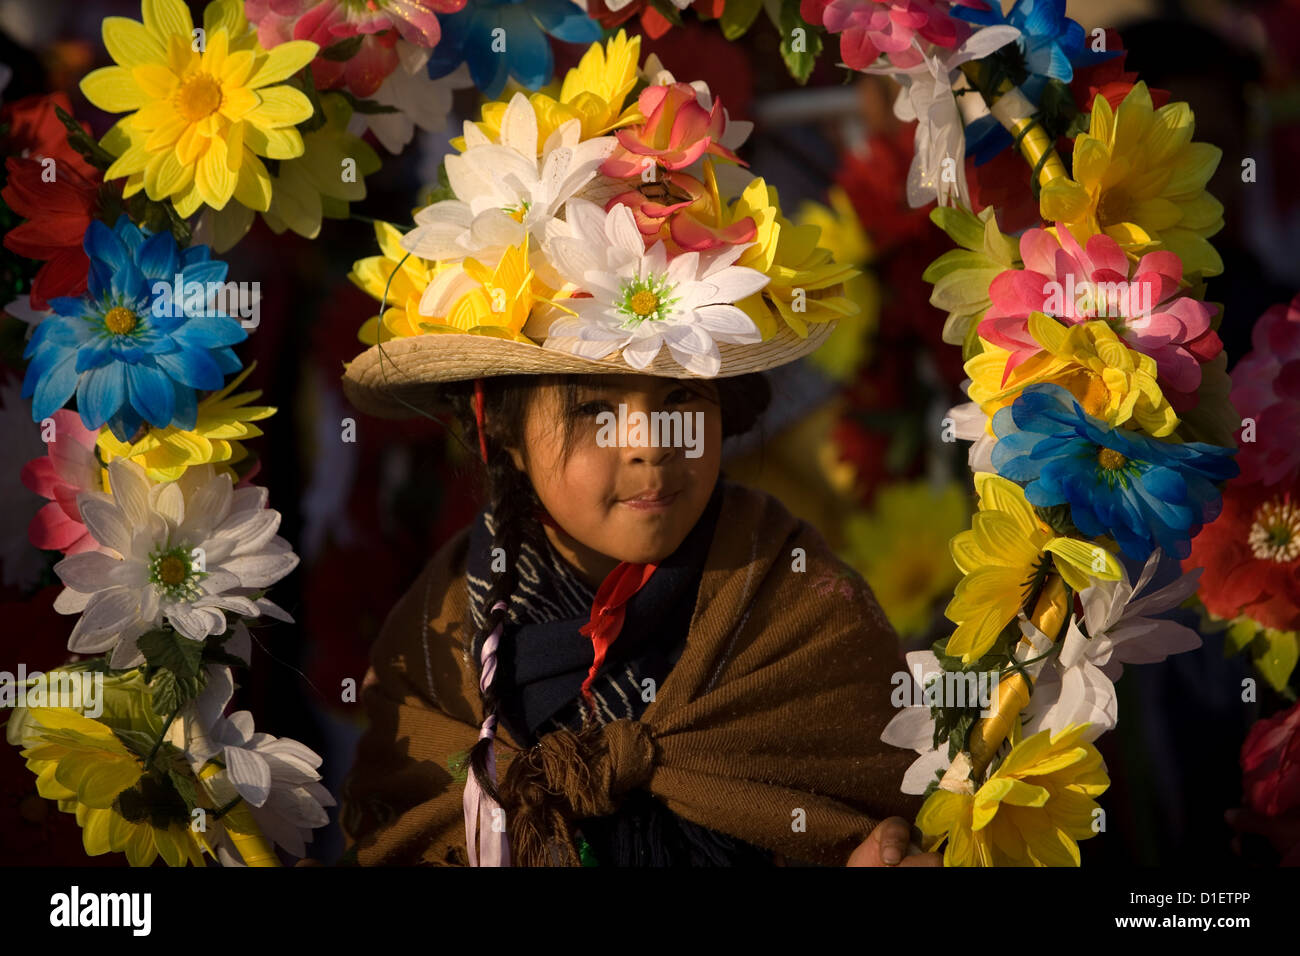 An indigenous Mazahua girl carries flowers outside of the Our Lady of Guadalupe Basilica in Mexico City, December 9, 2012. Stock Photo